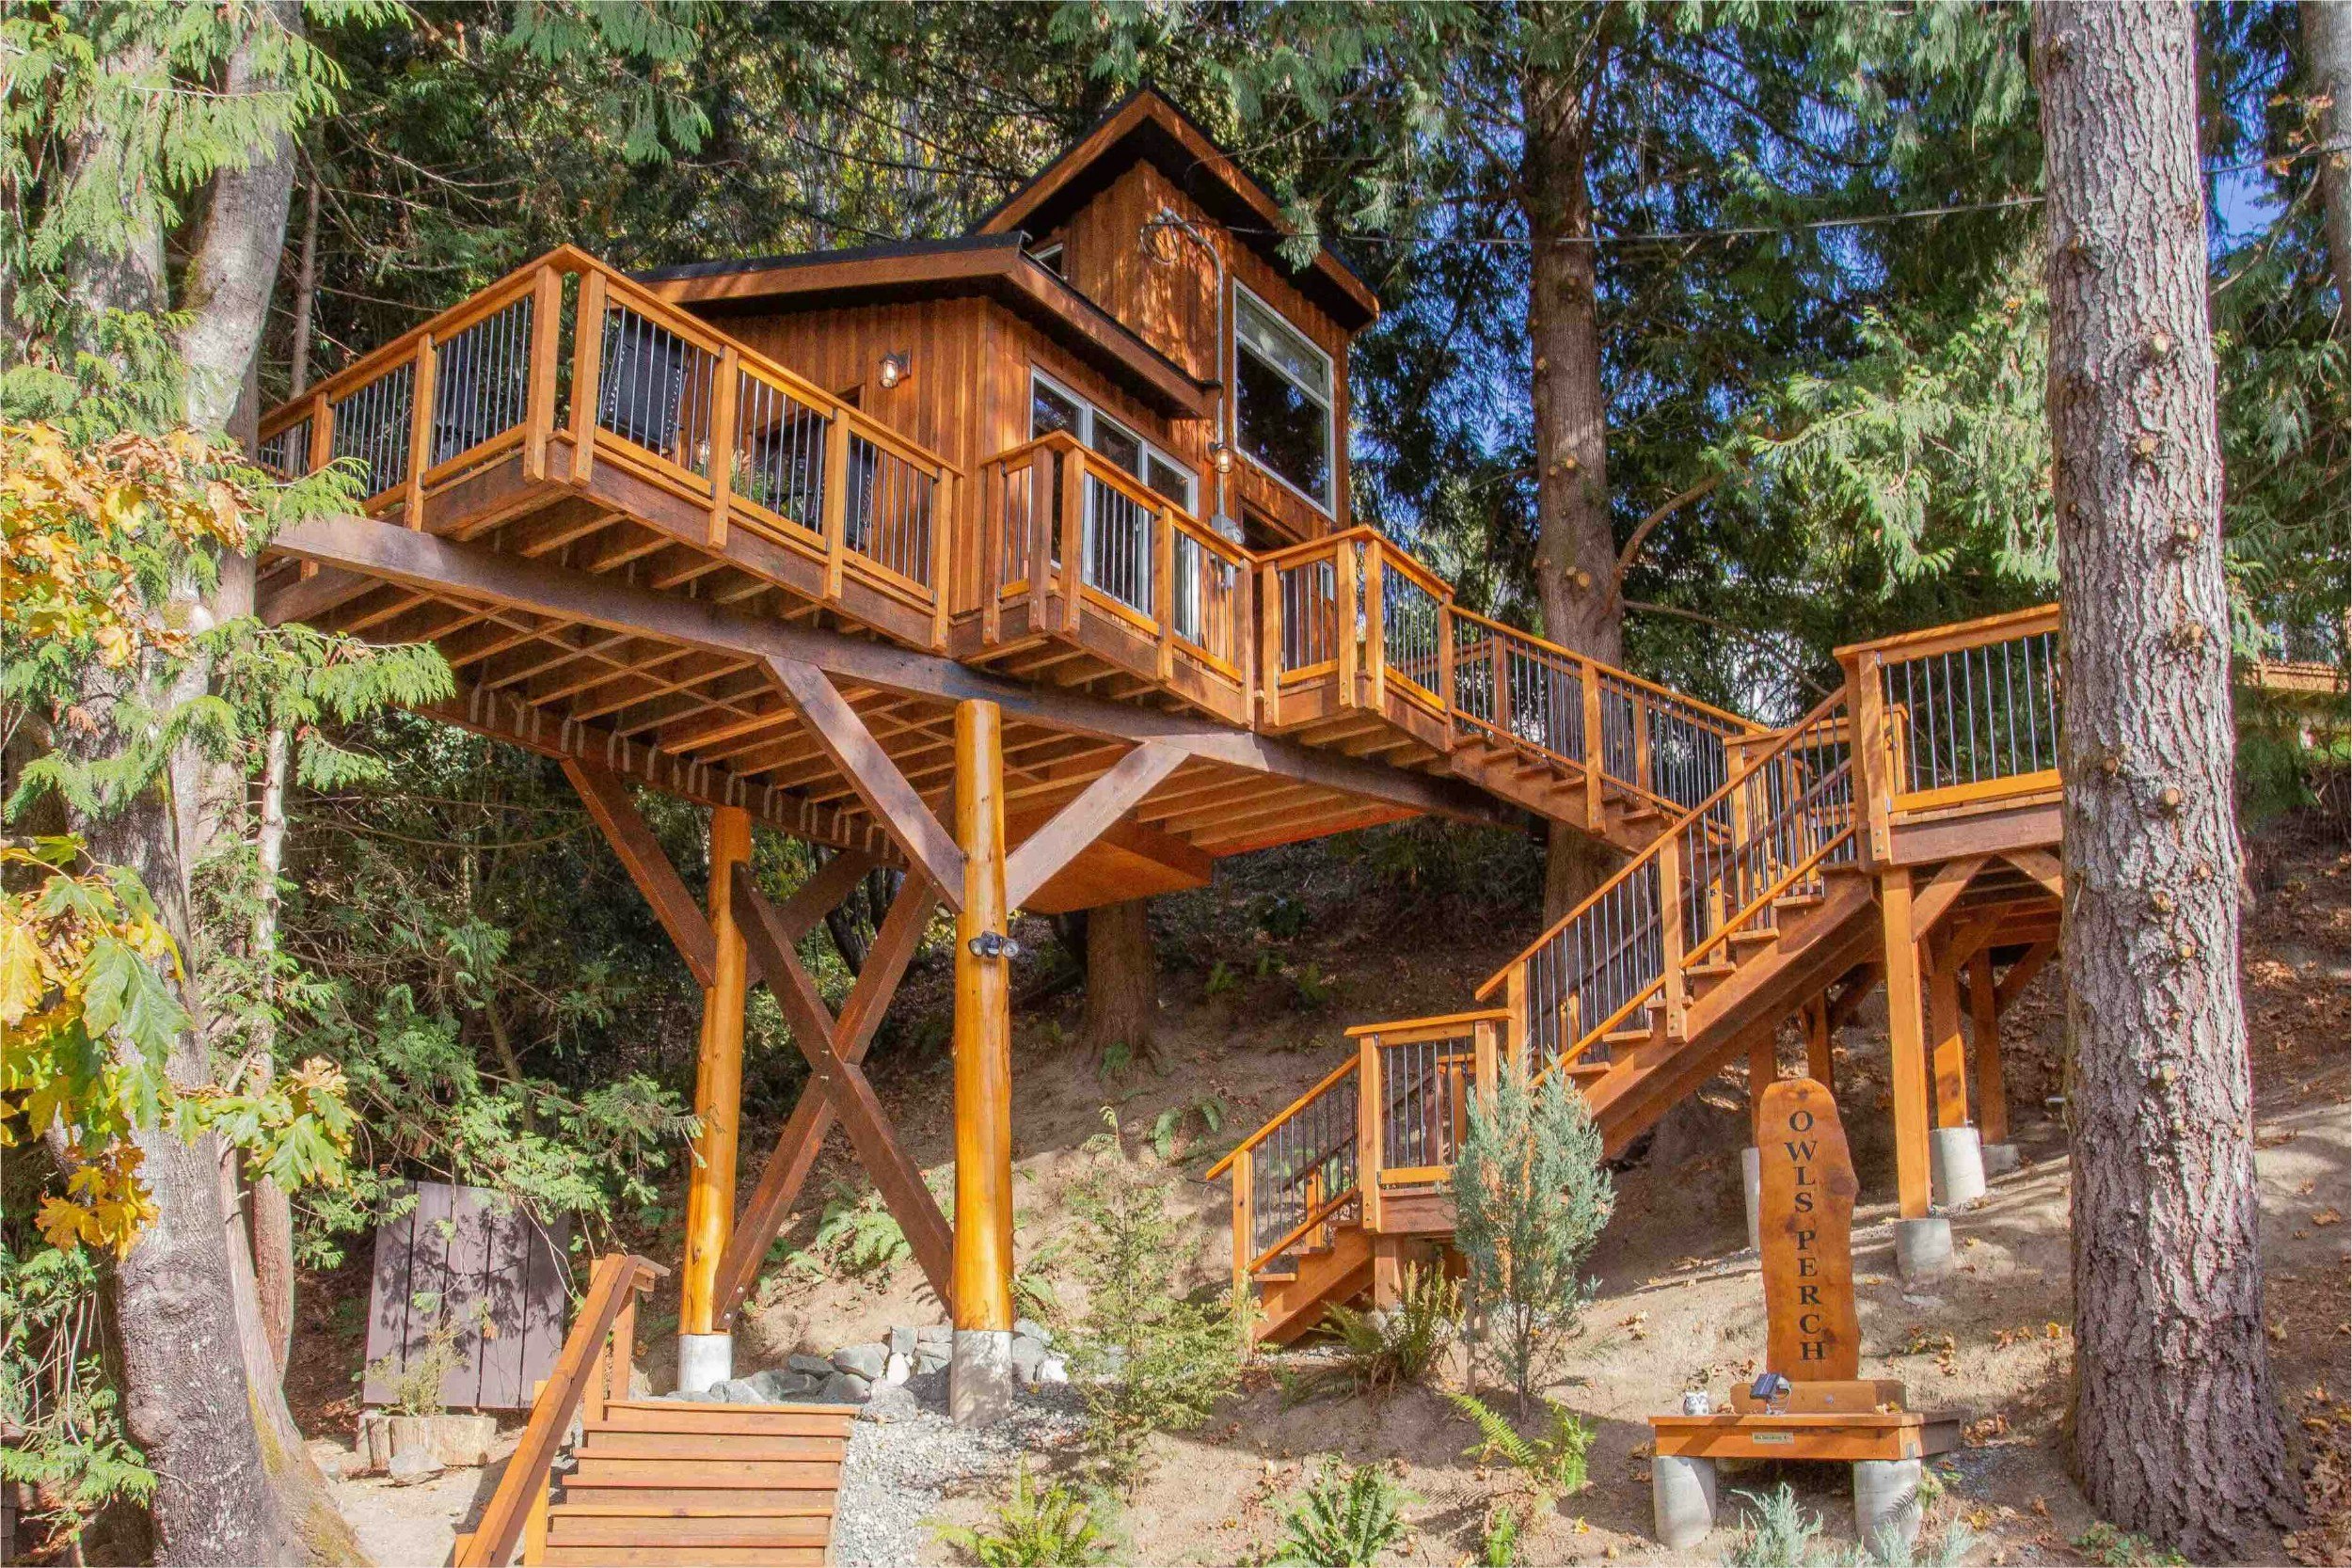 A treehouse in a forest with 50 steps up to it